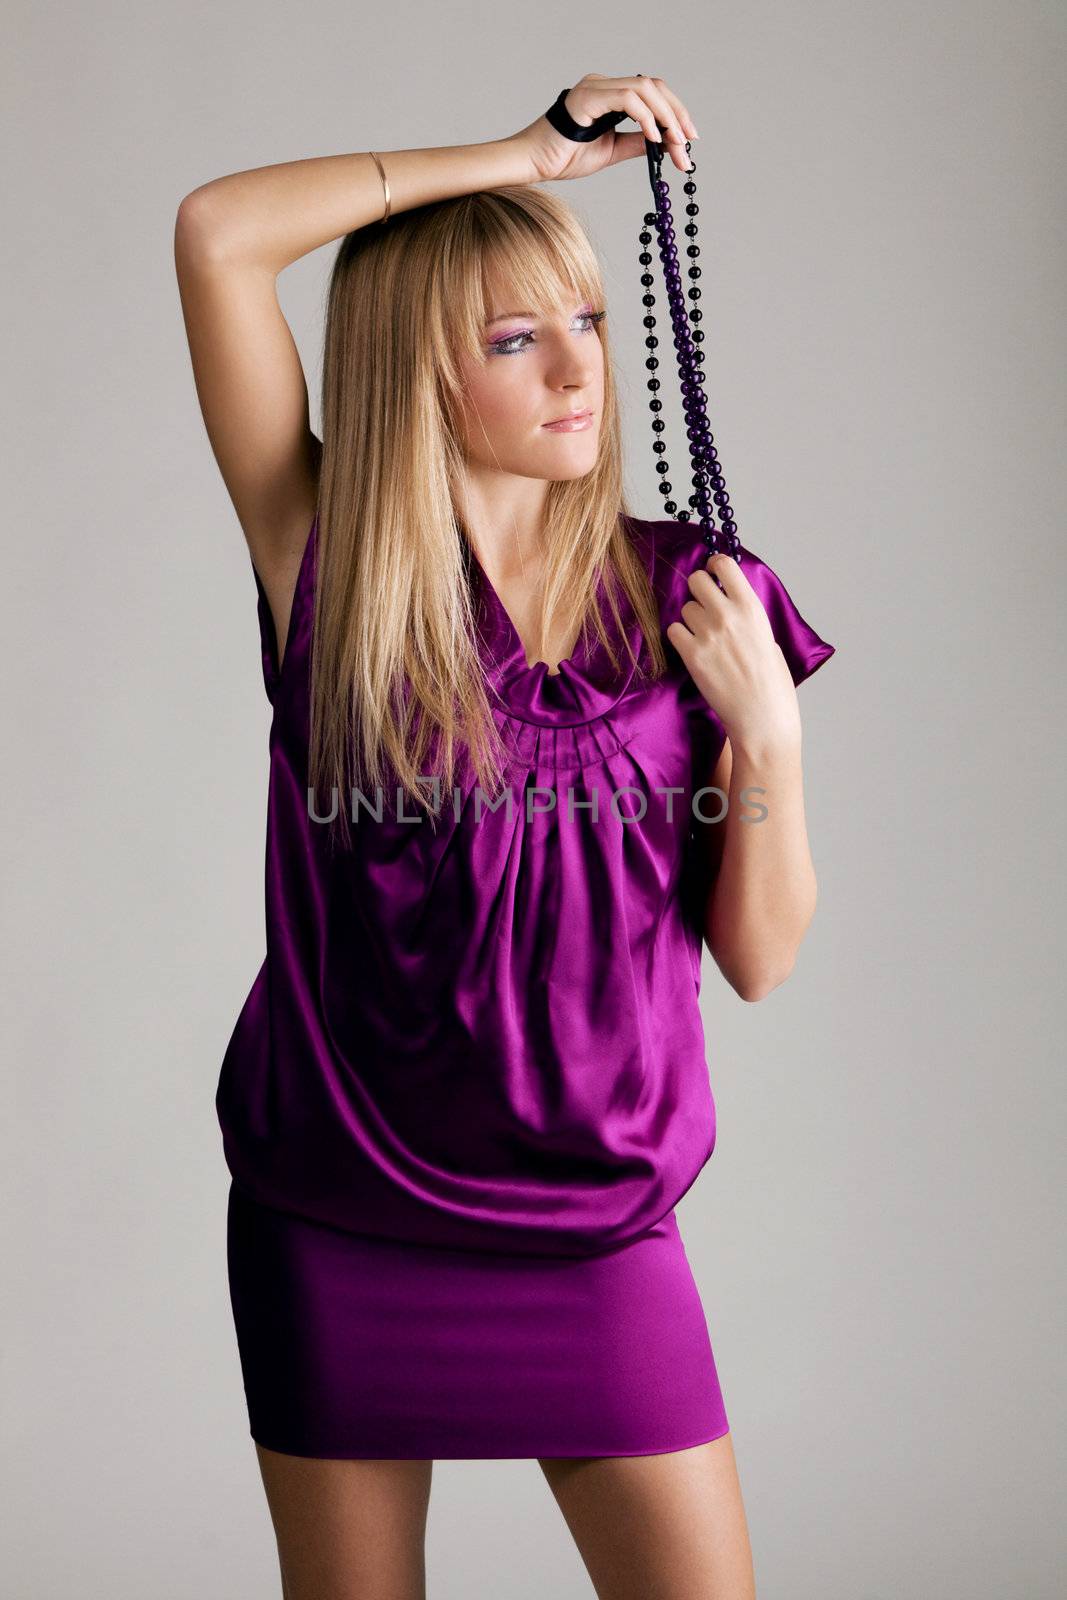 Beautiful lady in violet dress holding beads